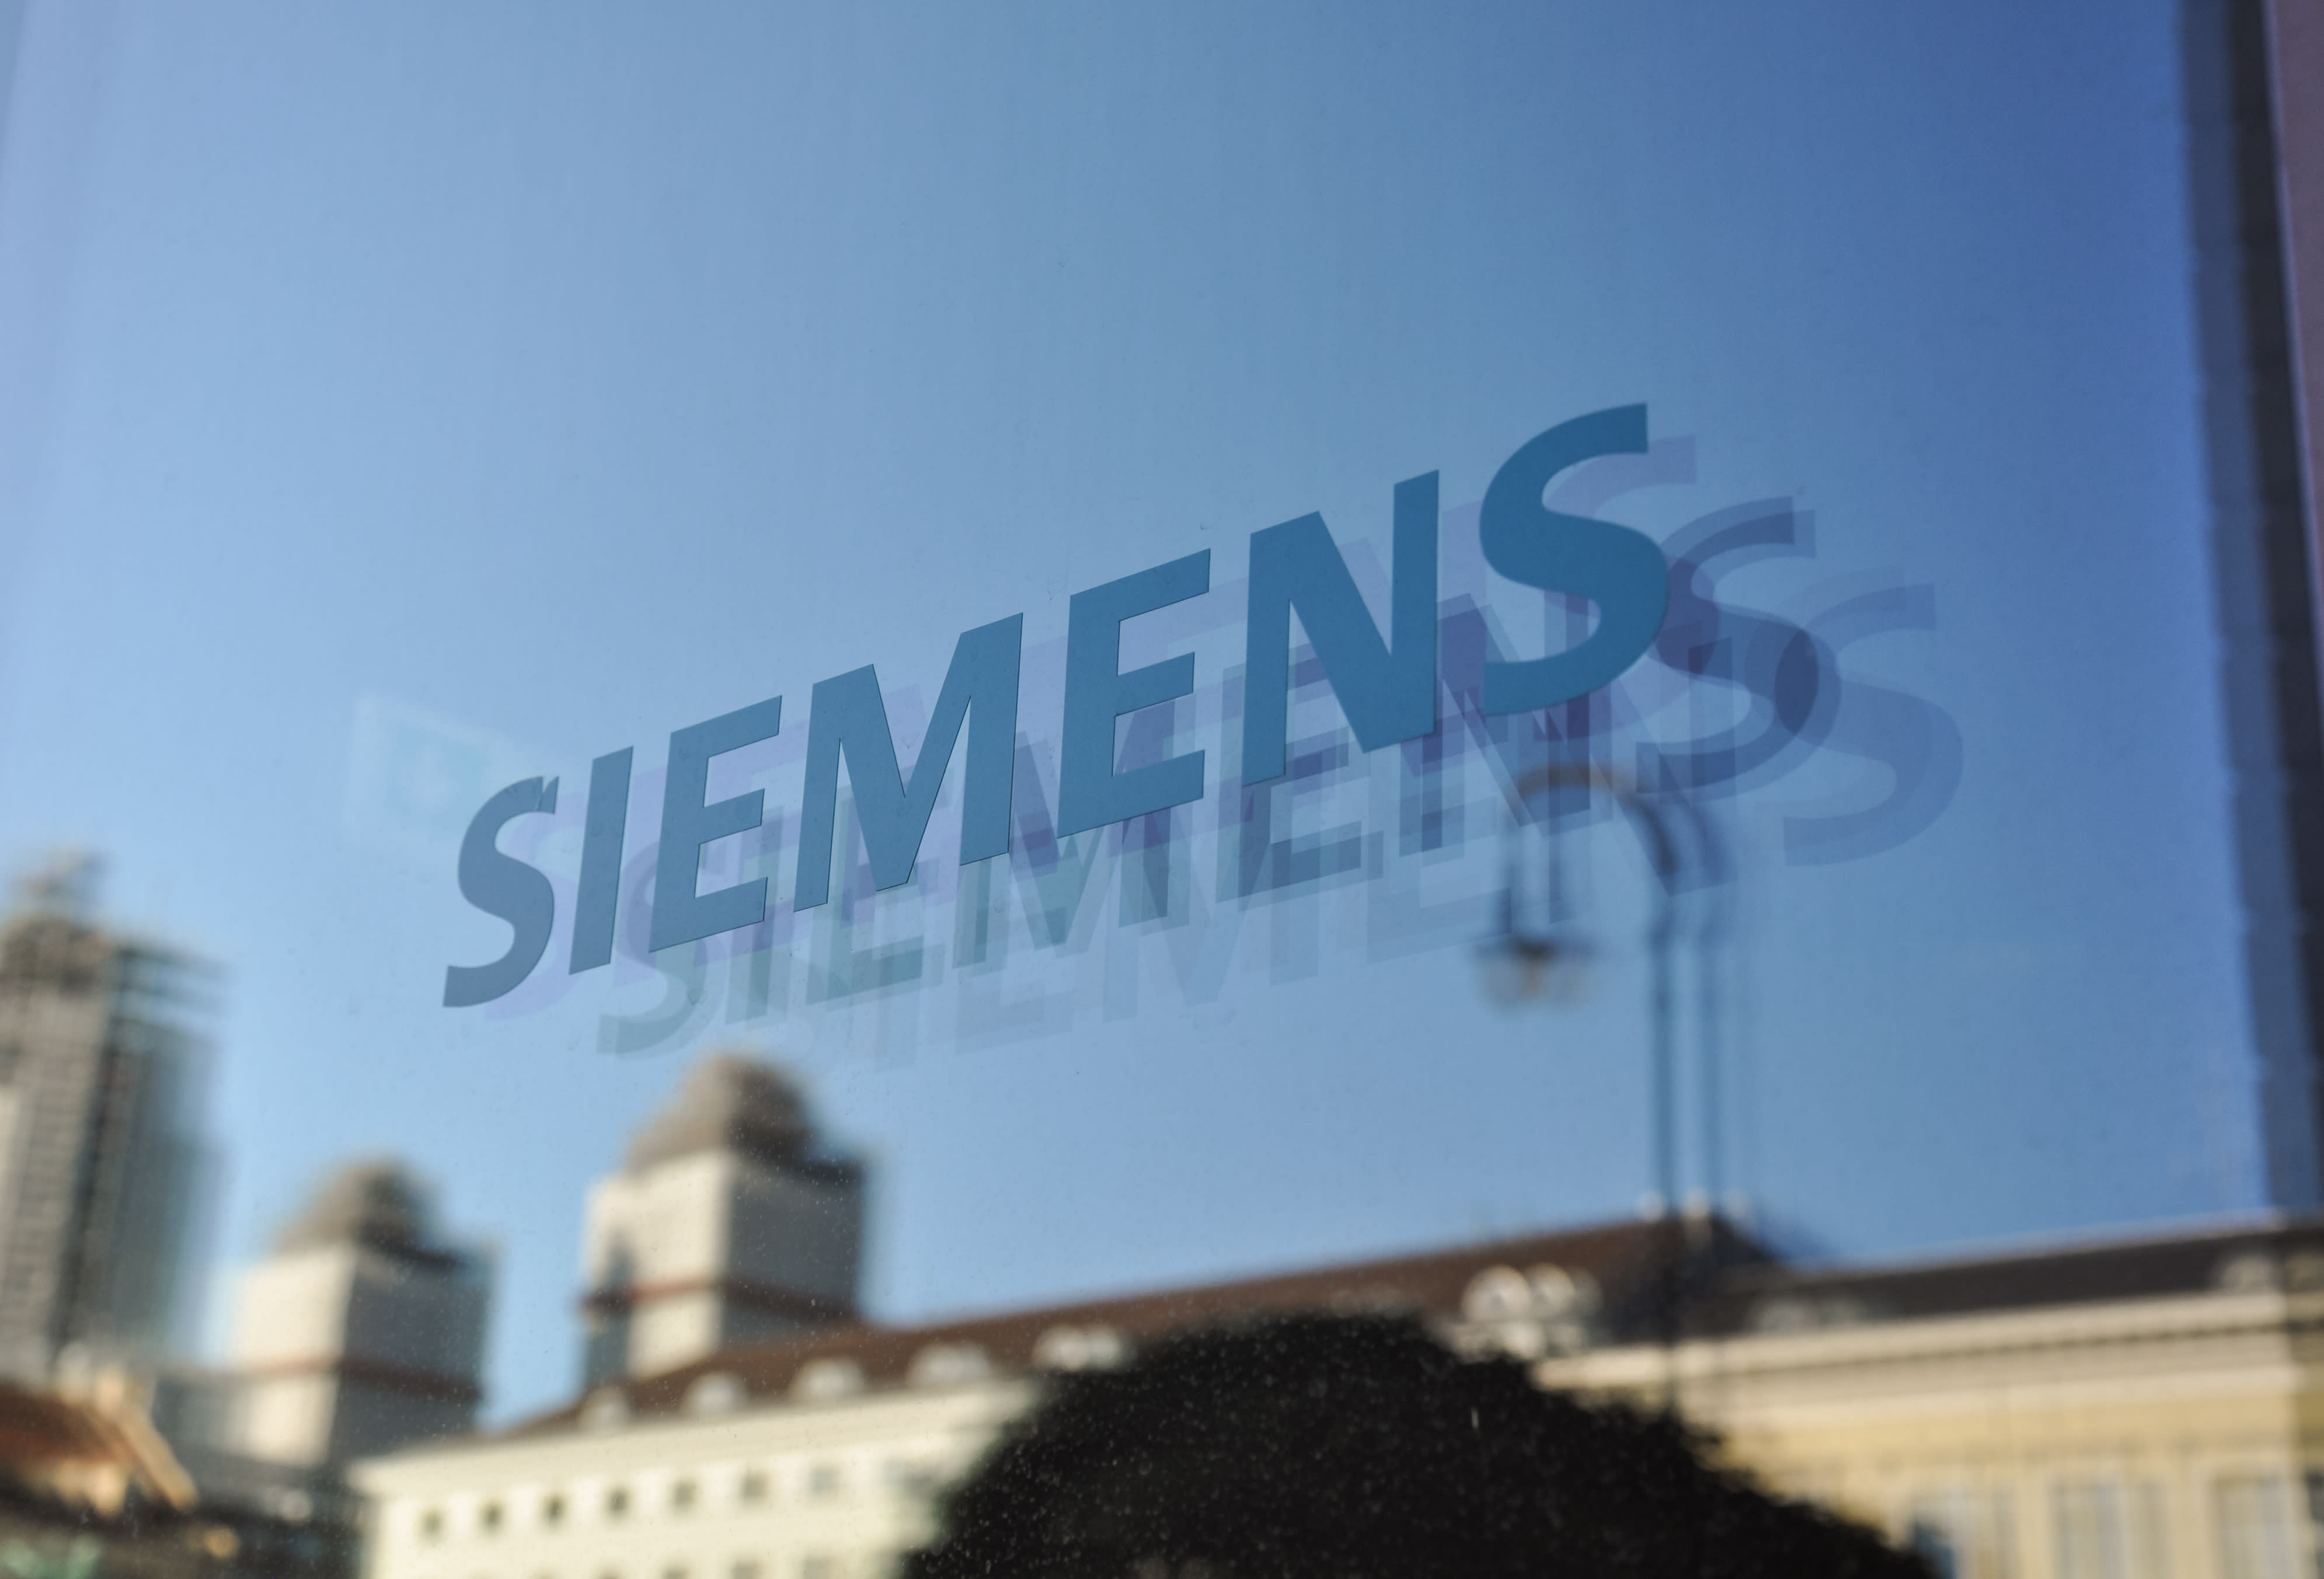 Siemens profit for the first quarter of 2021